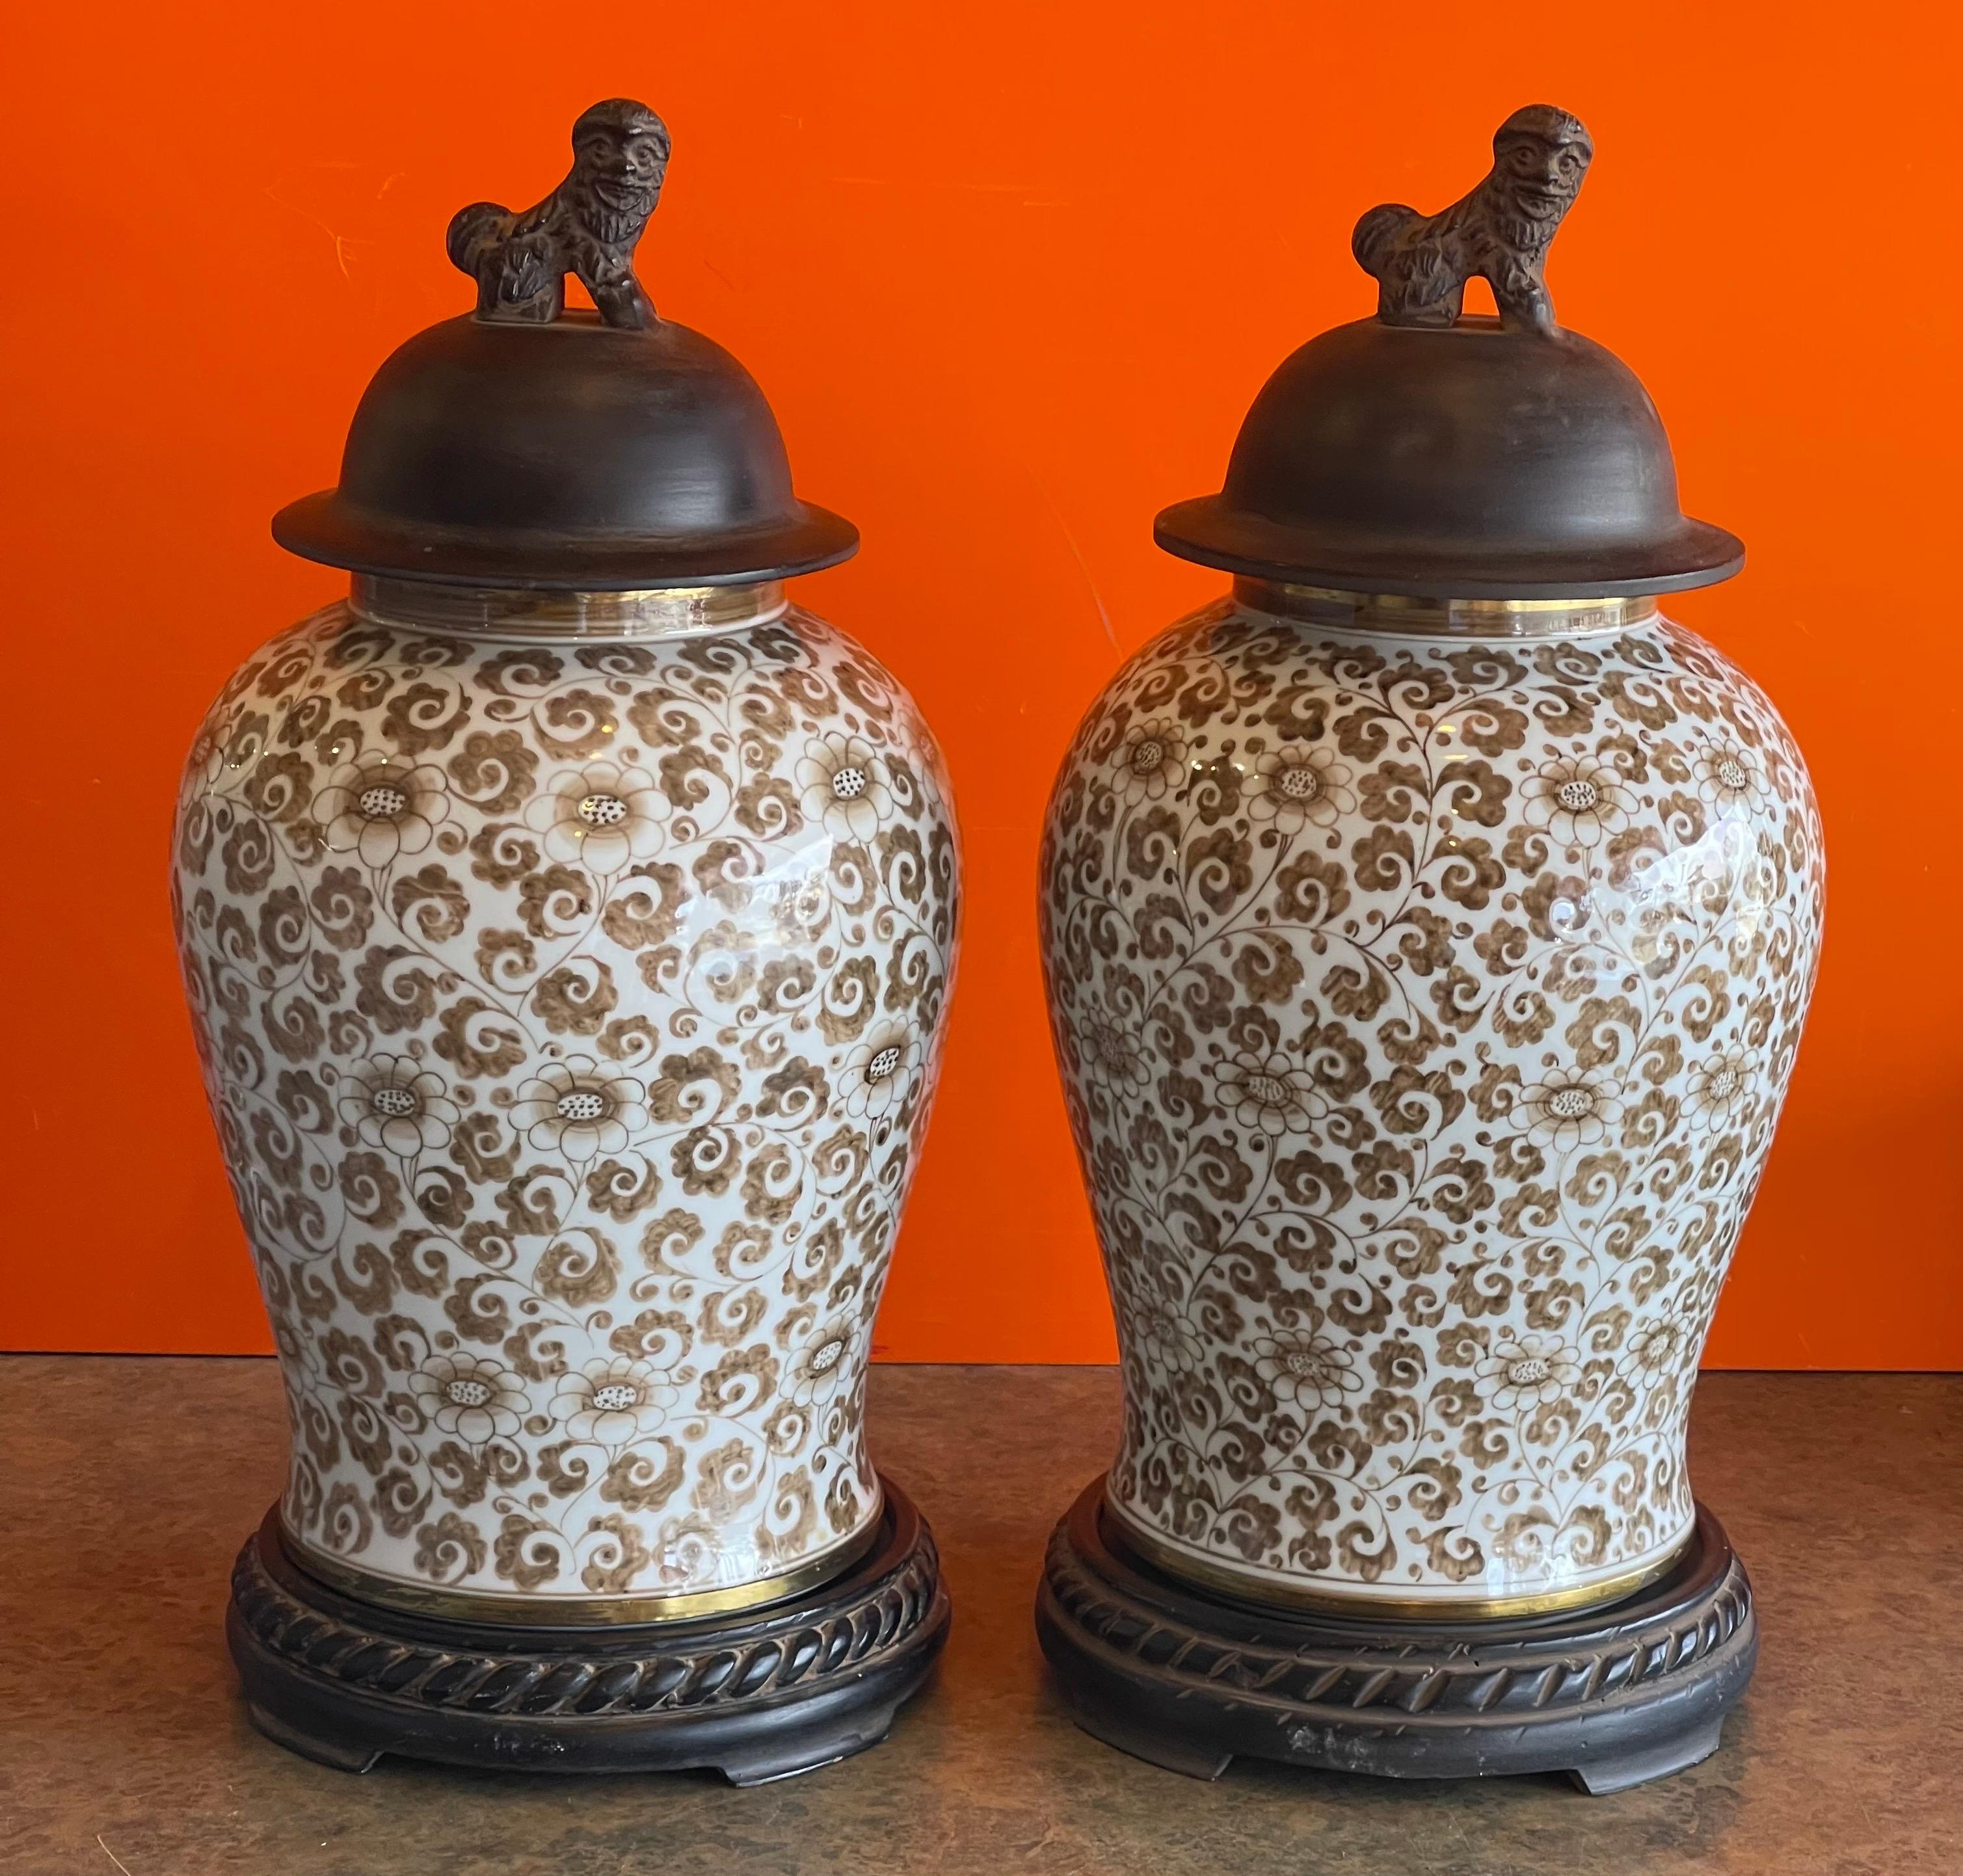 brown and white ginger jars